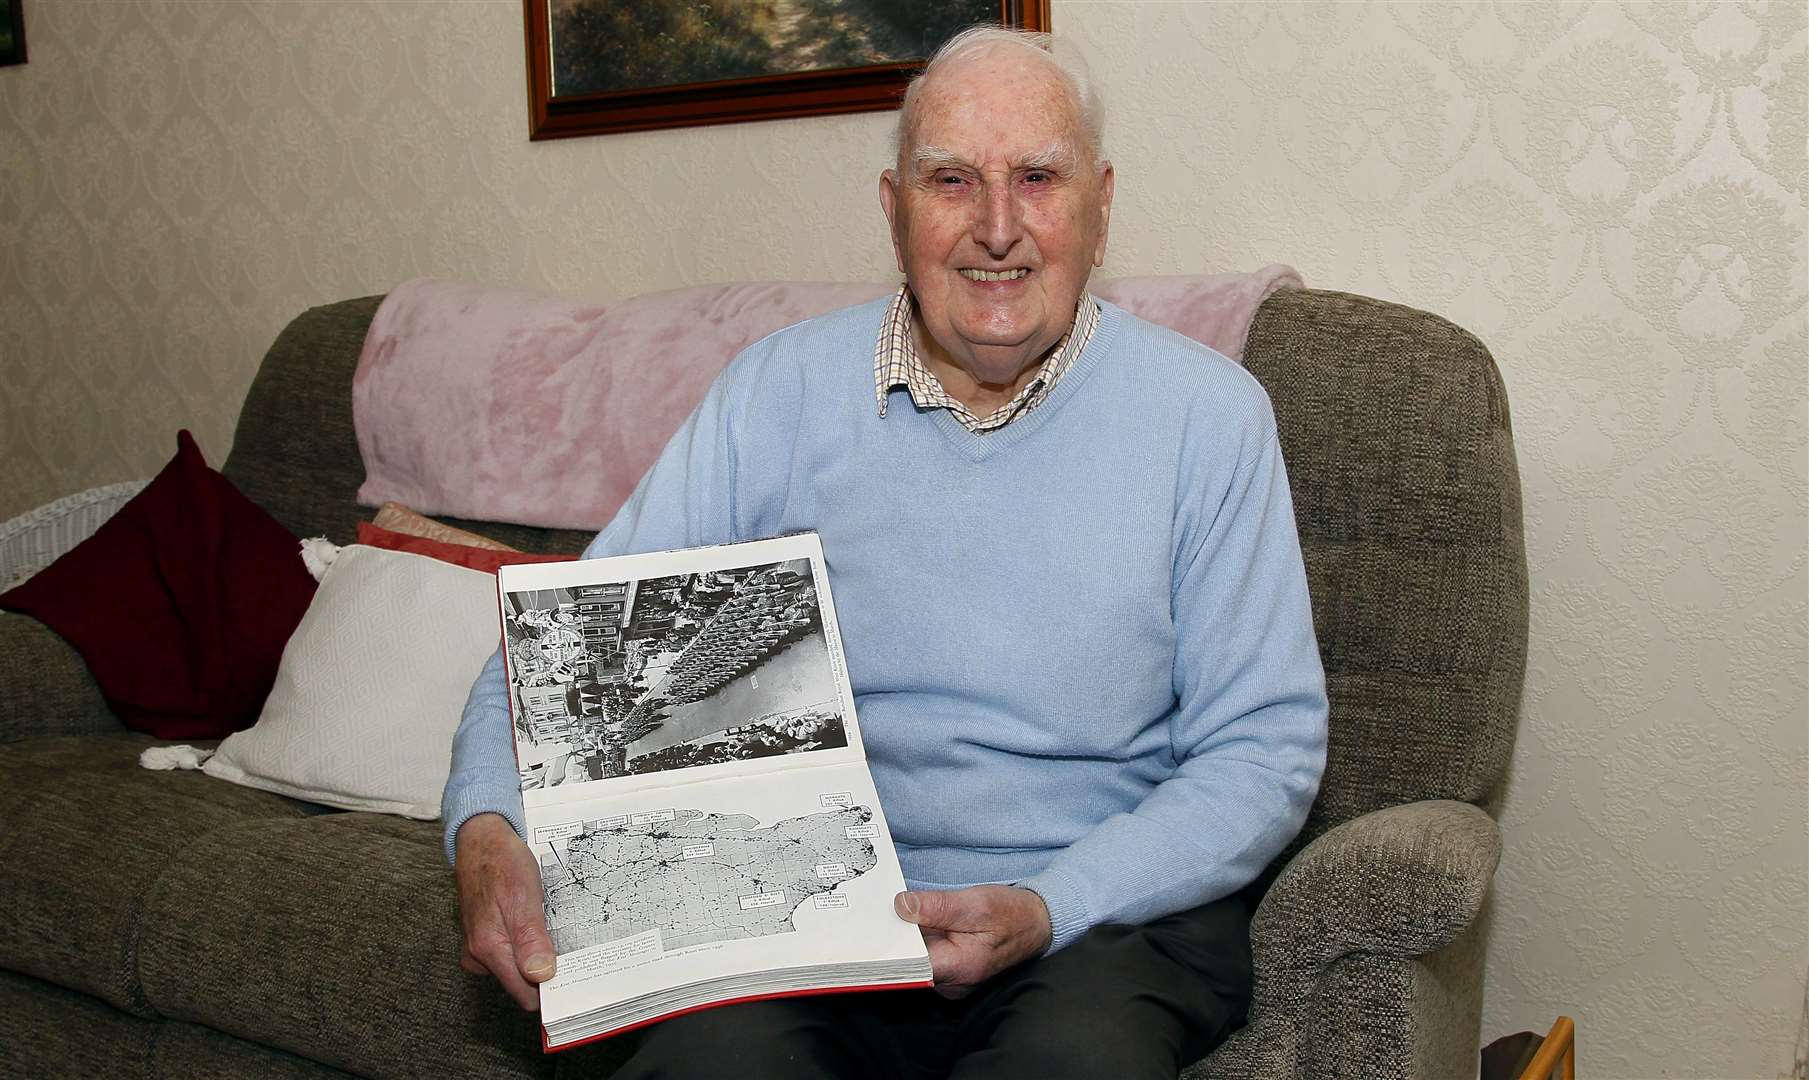 Alan Bignell has been sharing his doodlebug memories, pictured at his home in Barming, with a book showing the locations in Kent where they fell.Picture: Sean Aidan (10538031)